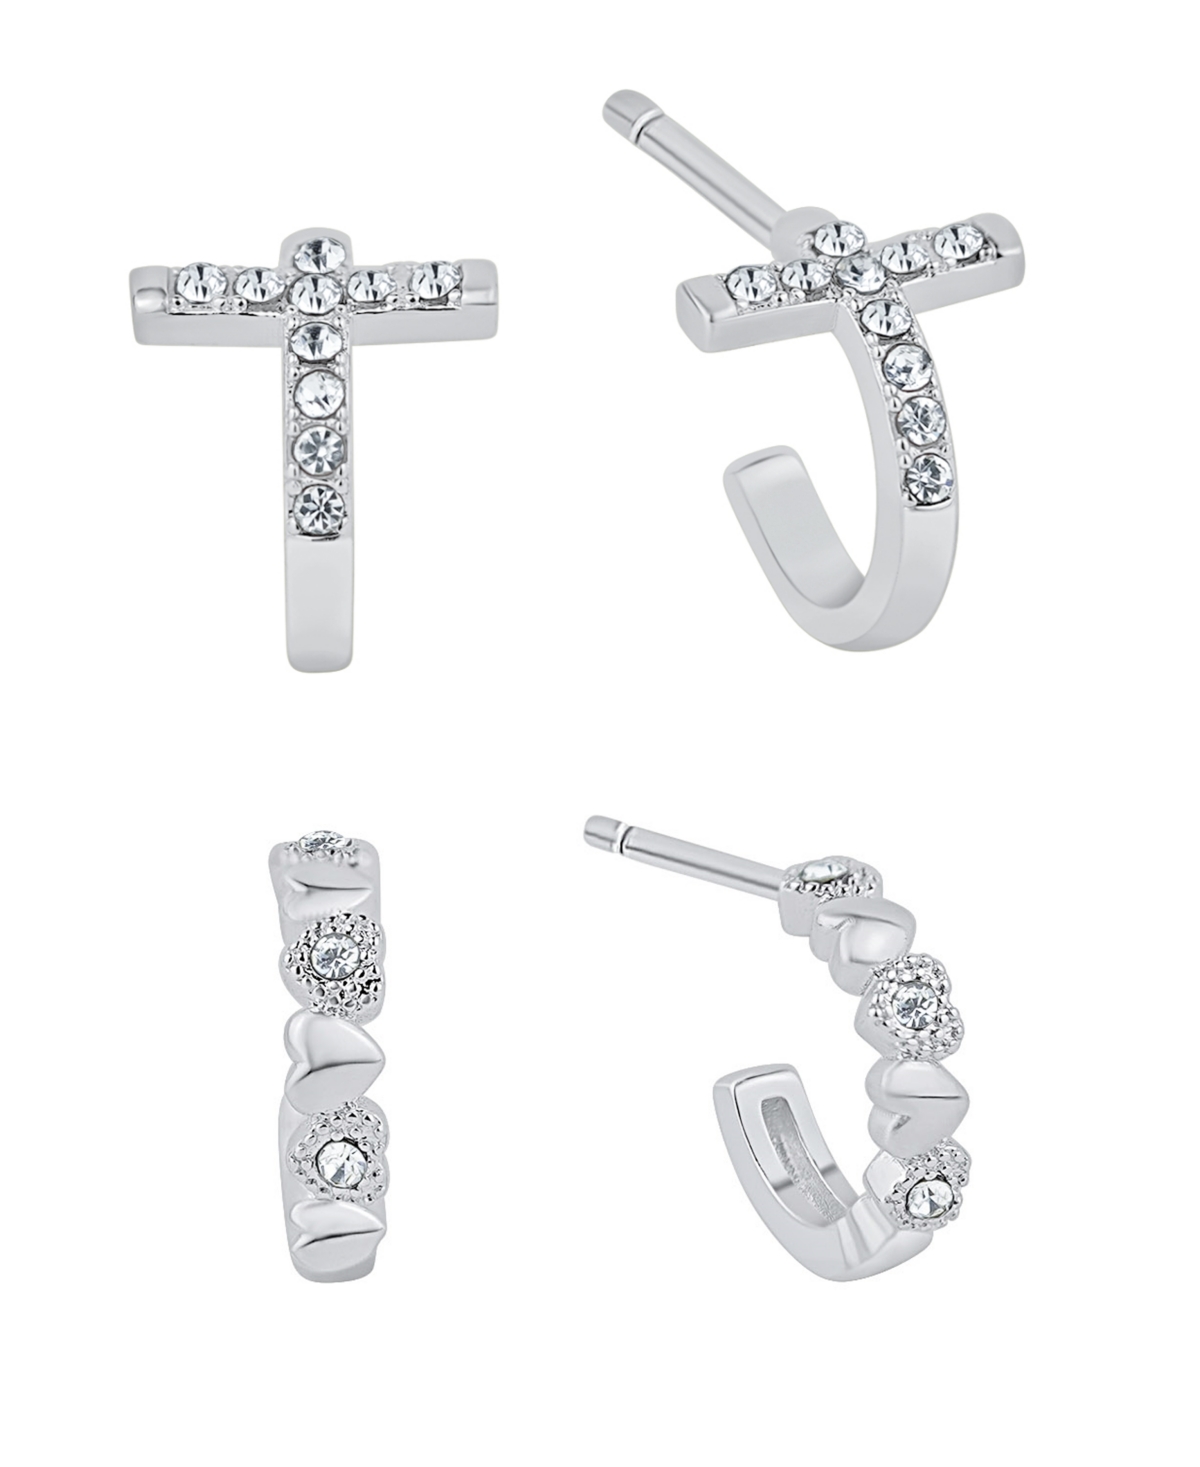 Crystal Heart And Cross Hoop Earring Set - Silver Plated